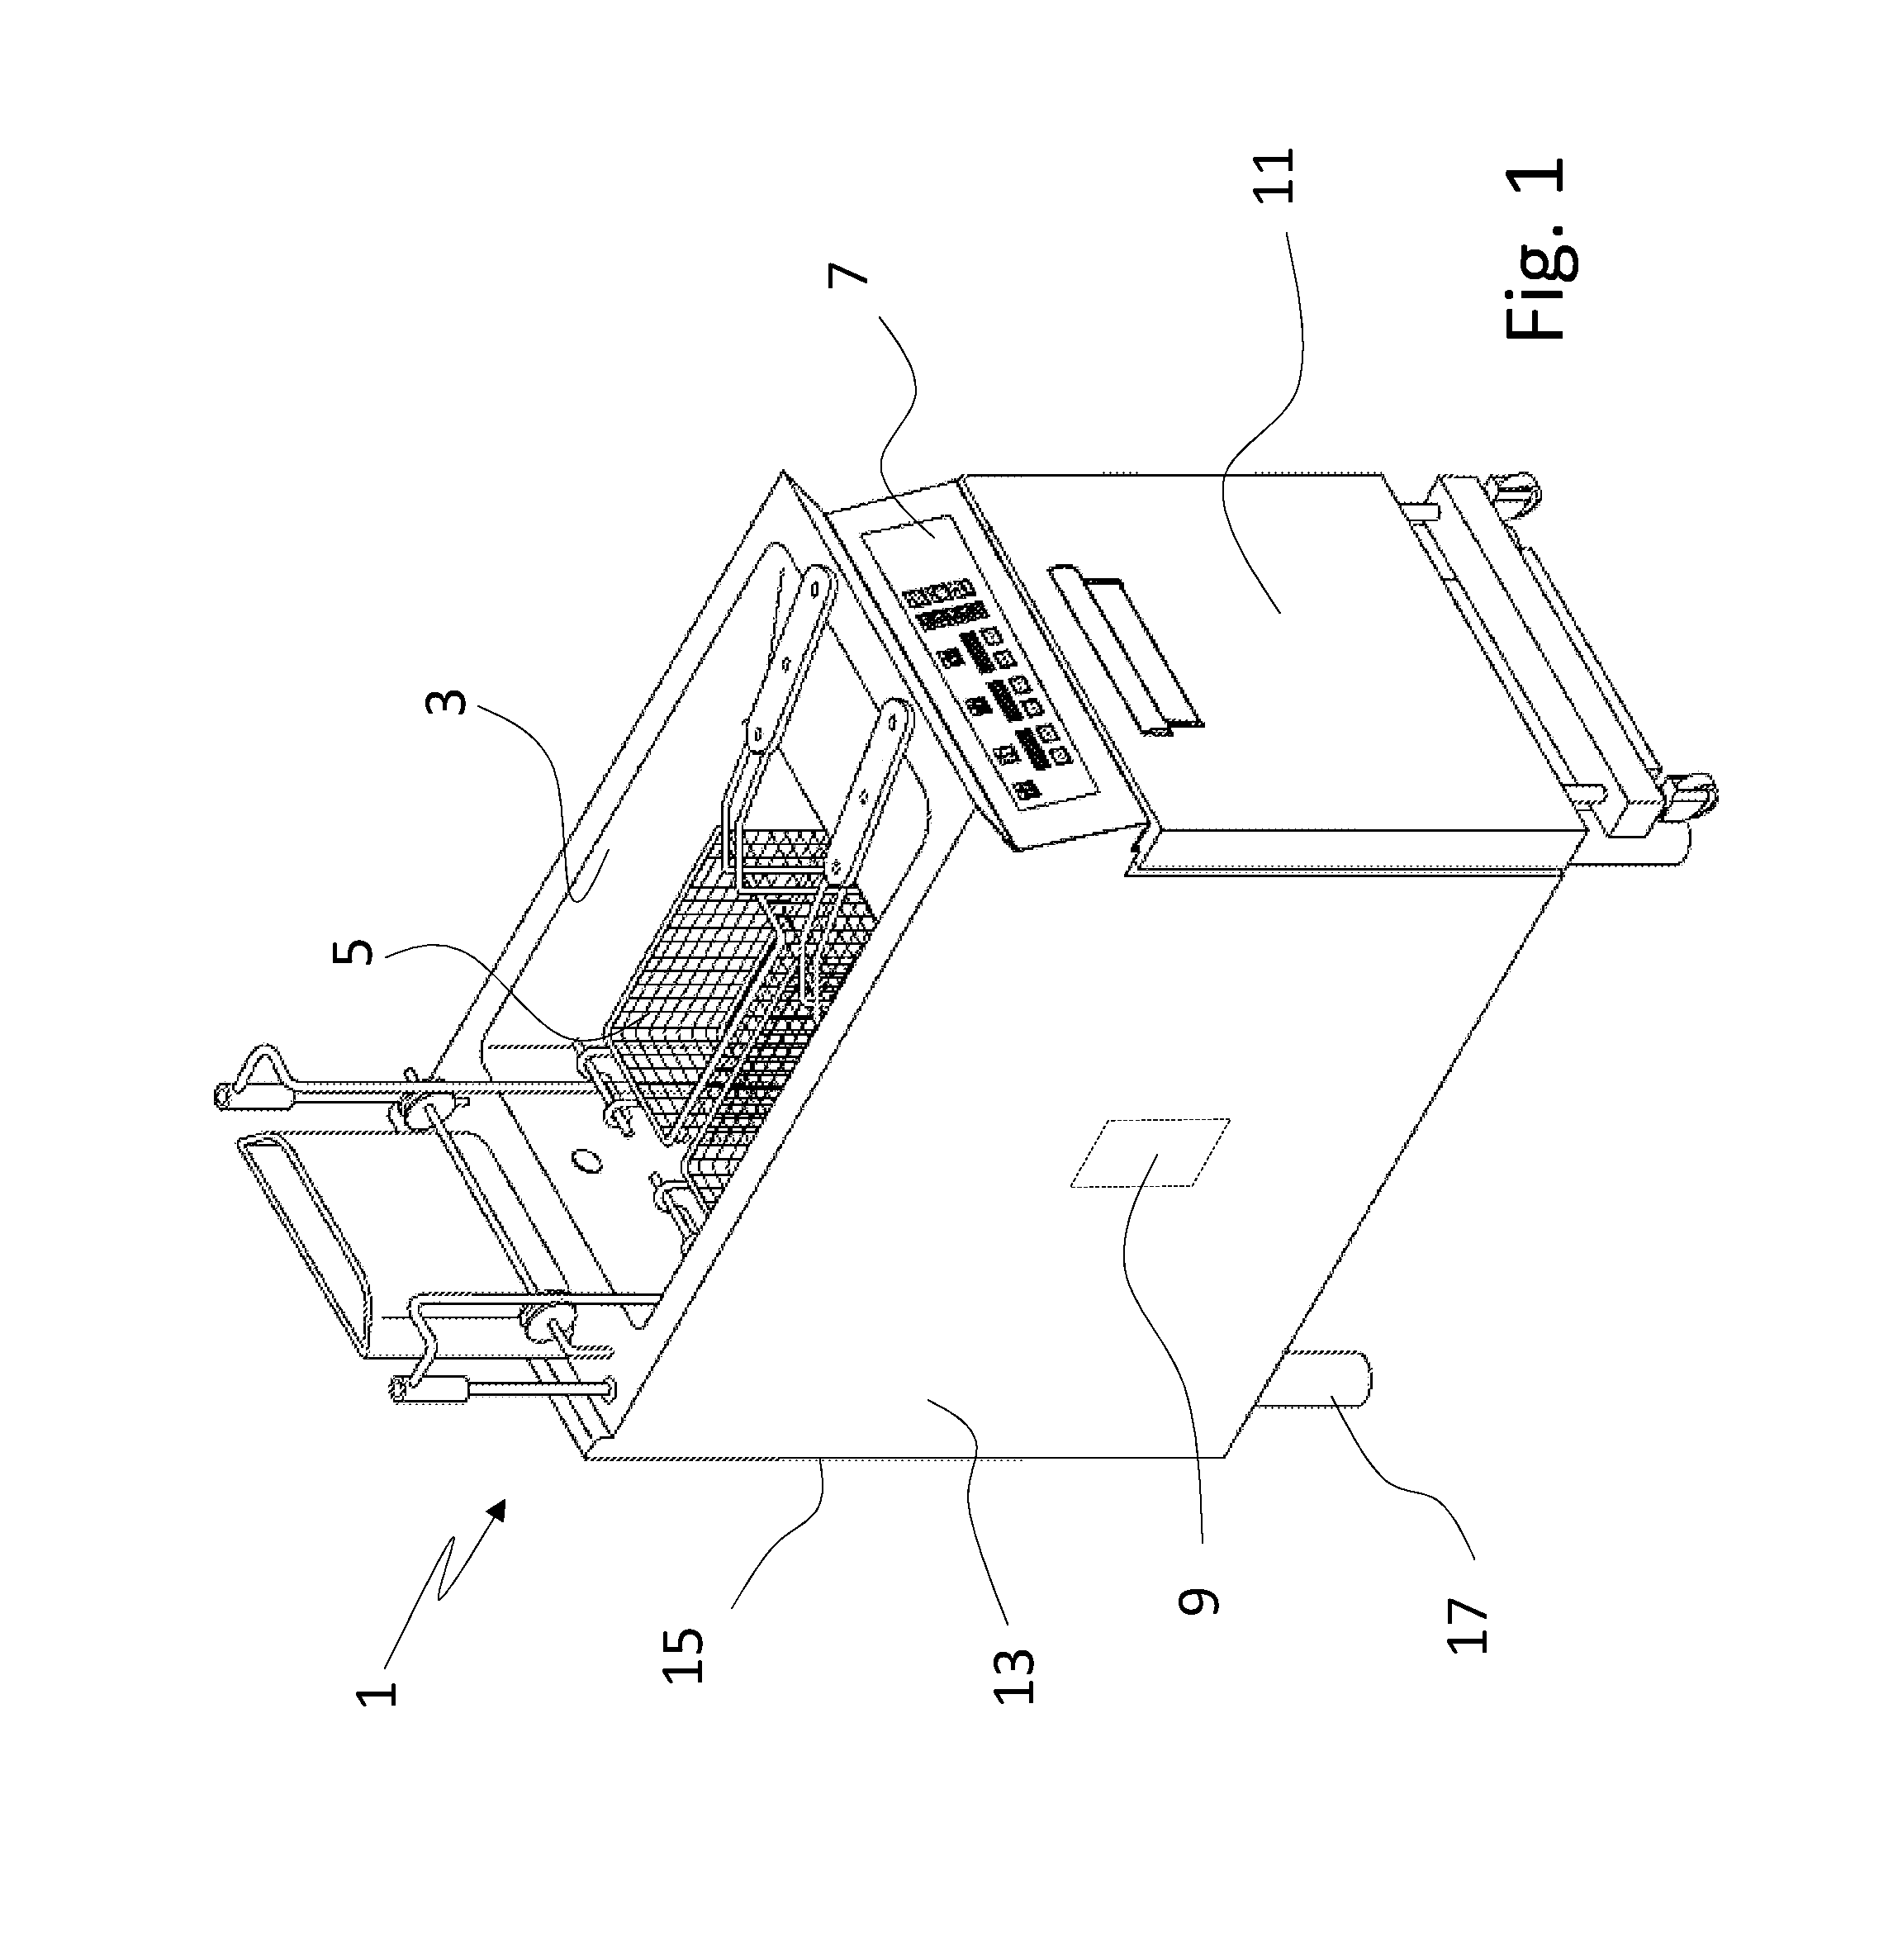 Method and computer program for controlling a fryer, and fryer arranged for carrying out such method